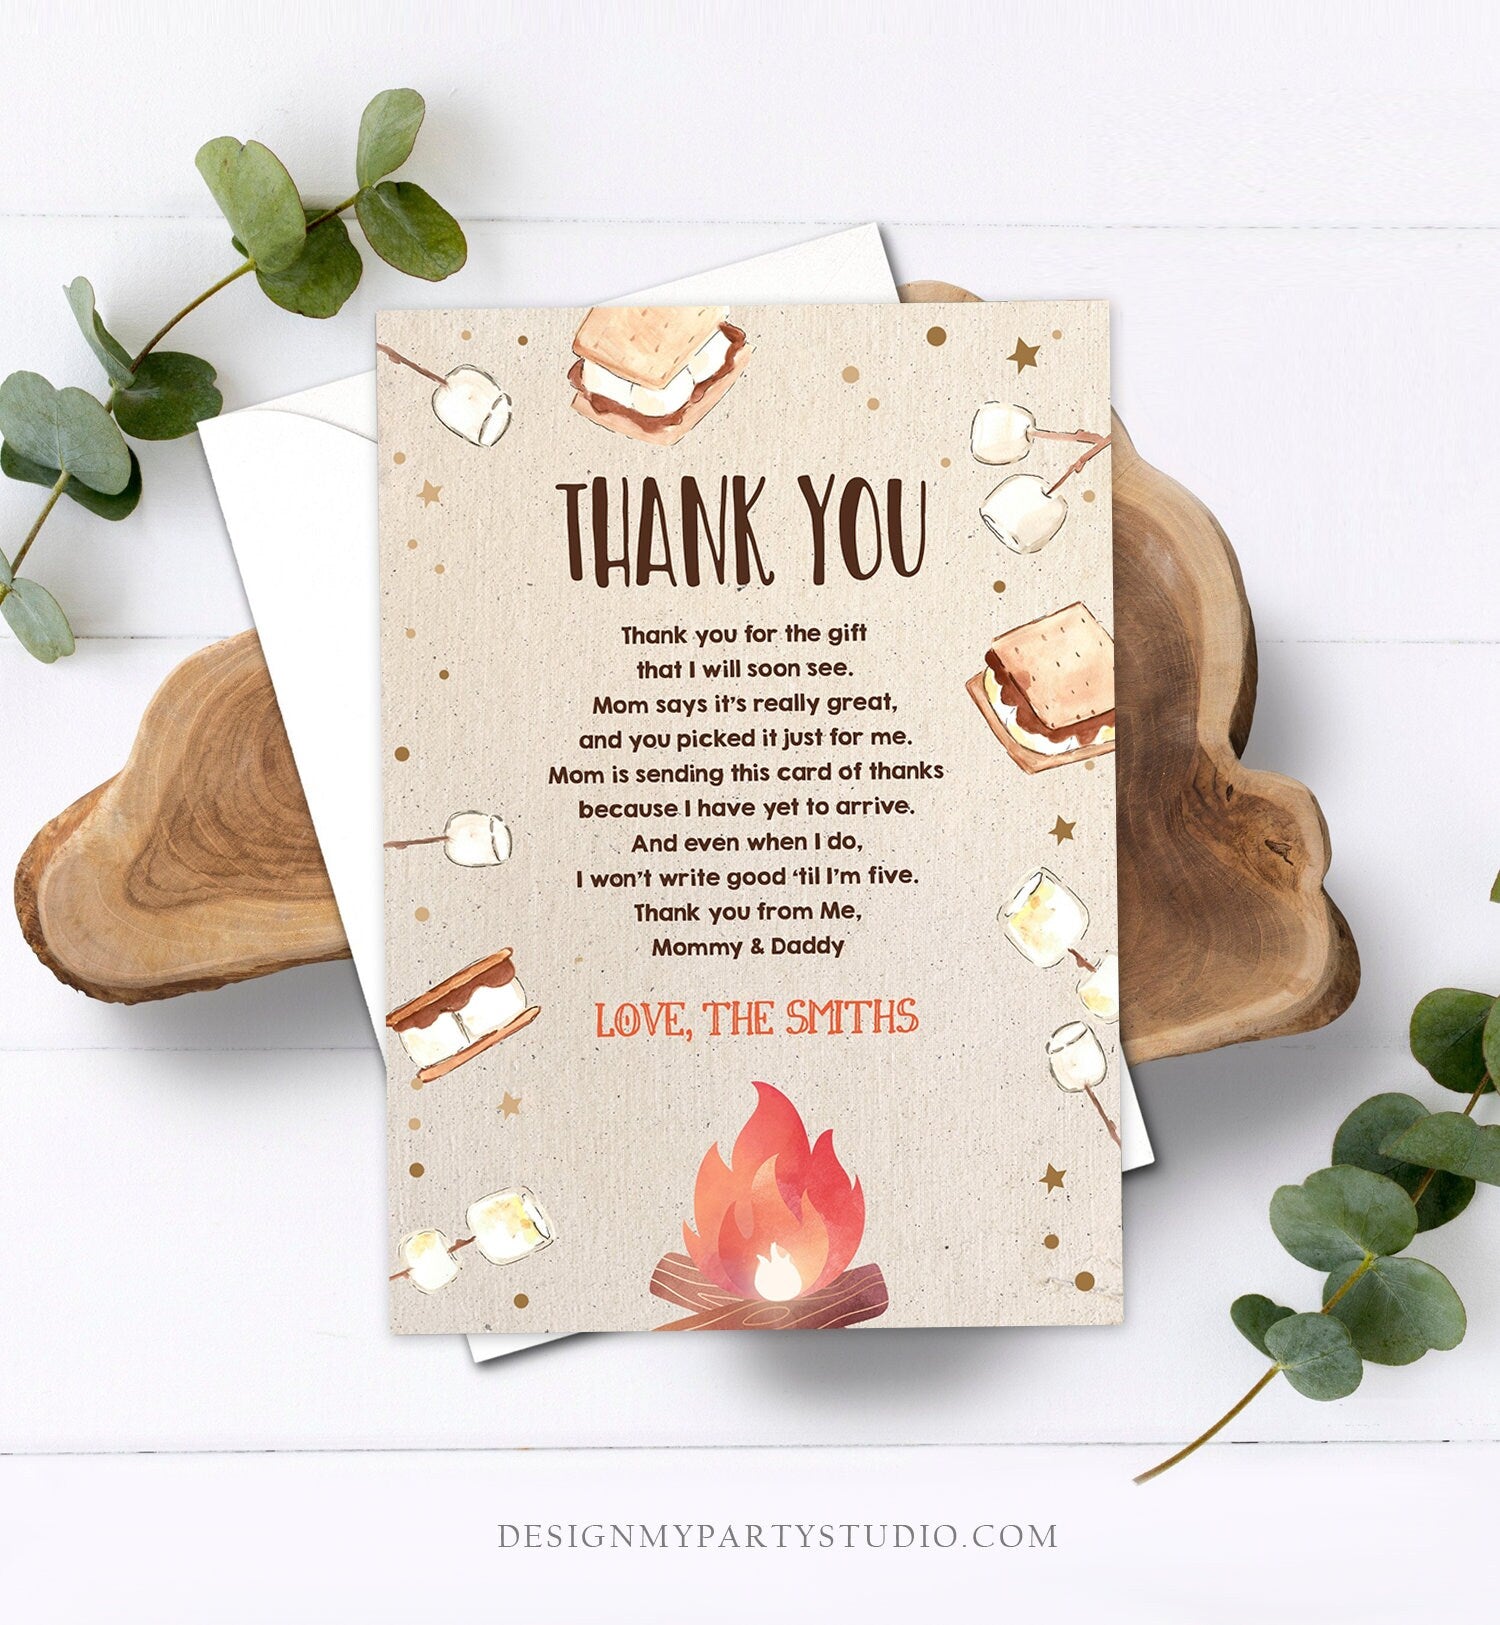 Editable Baby shower Thank you Card S'more fun Smores Thank You Rustic Gender Neutral Fall Autumn Template Instant Download Corjl 0179